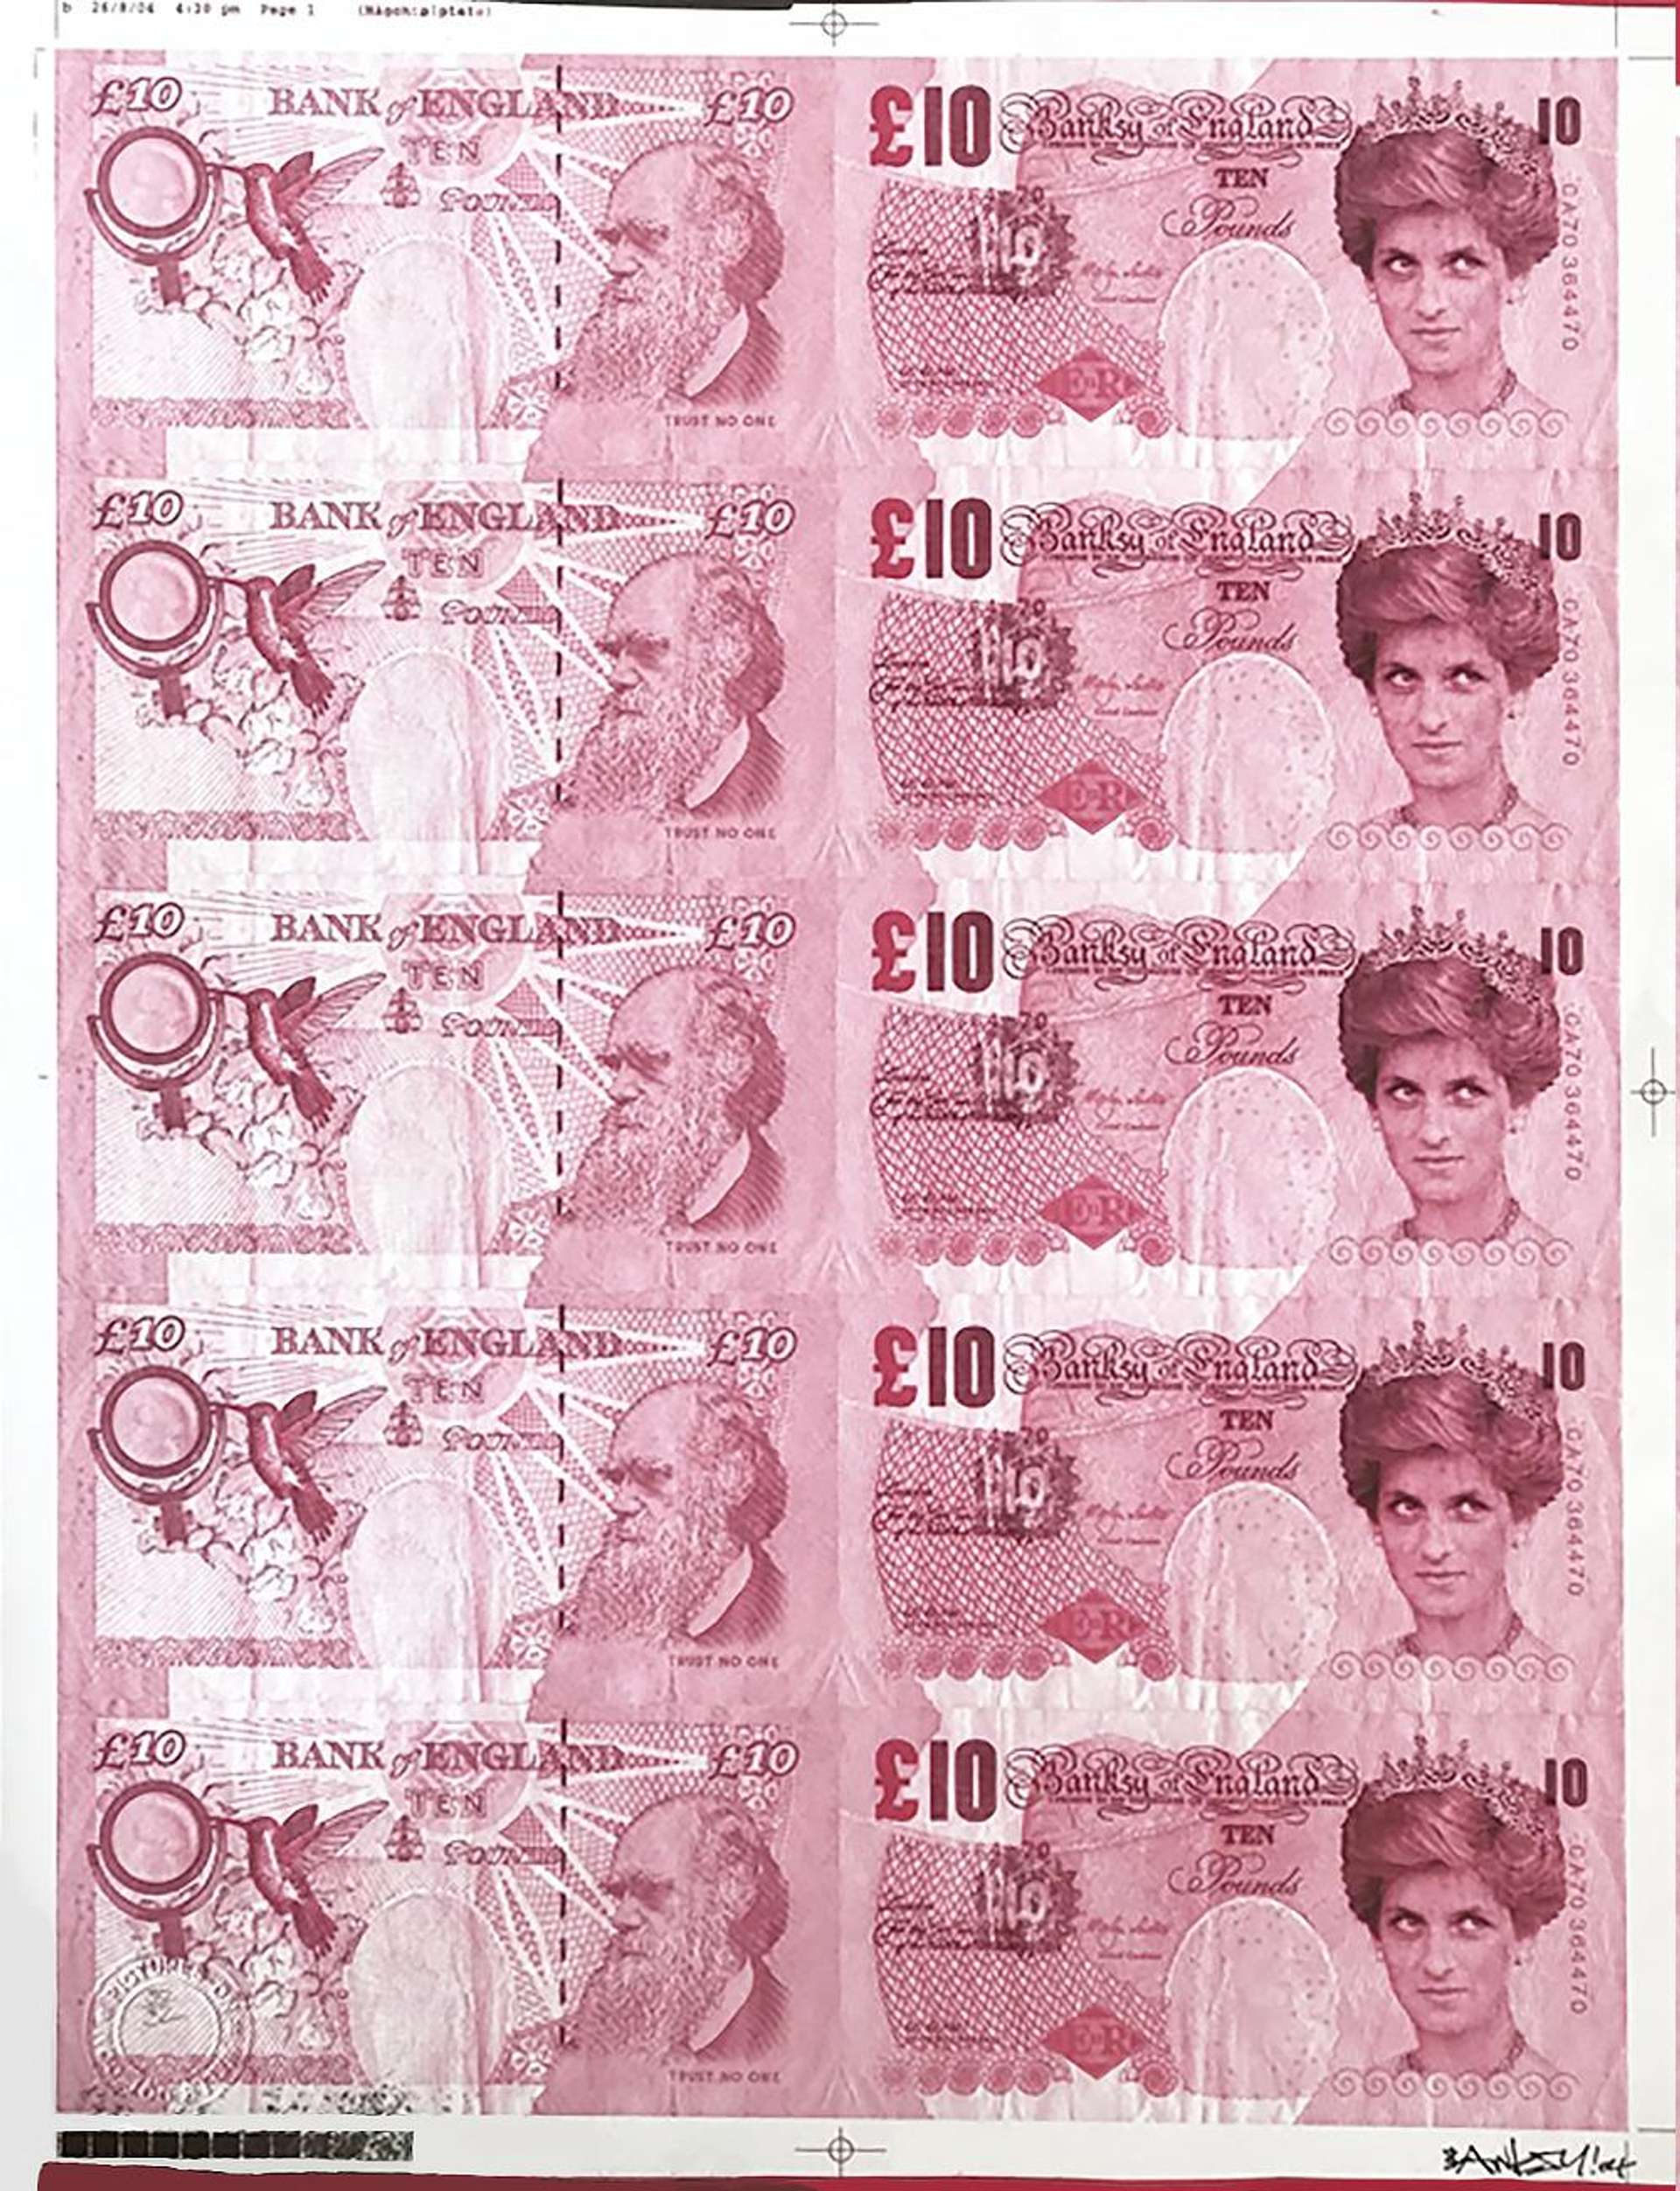 A lithography by Banksy featuring five British £10 notes, each with controversial differences: a portrait of Princess Diana instead of the Queen and the inscription "Trust Noone."